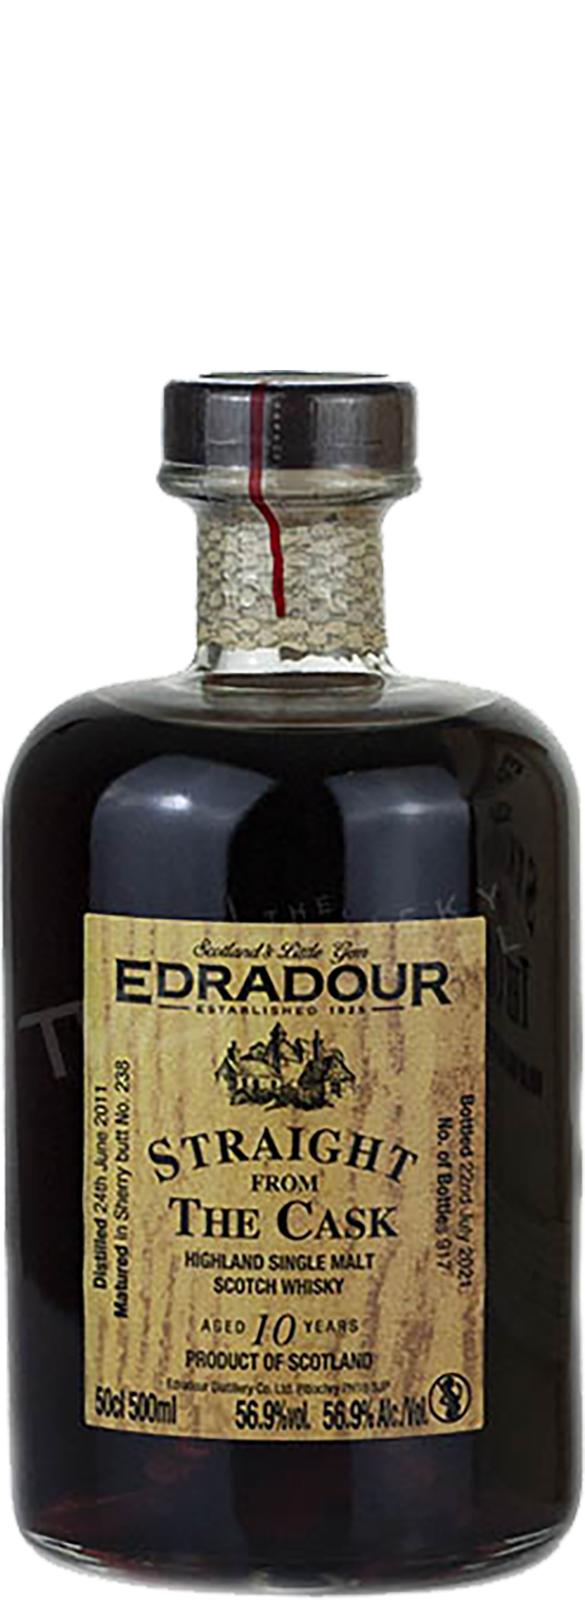 Edradour Straight From The Cask Single Sherry Cask #238 2011 10 Year Old Whisky | 500ML